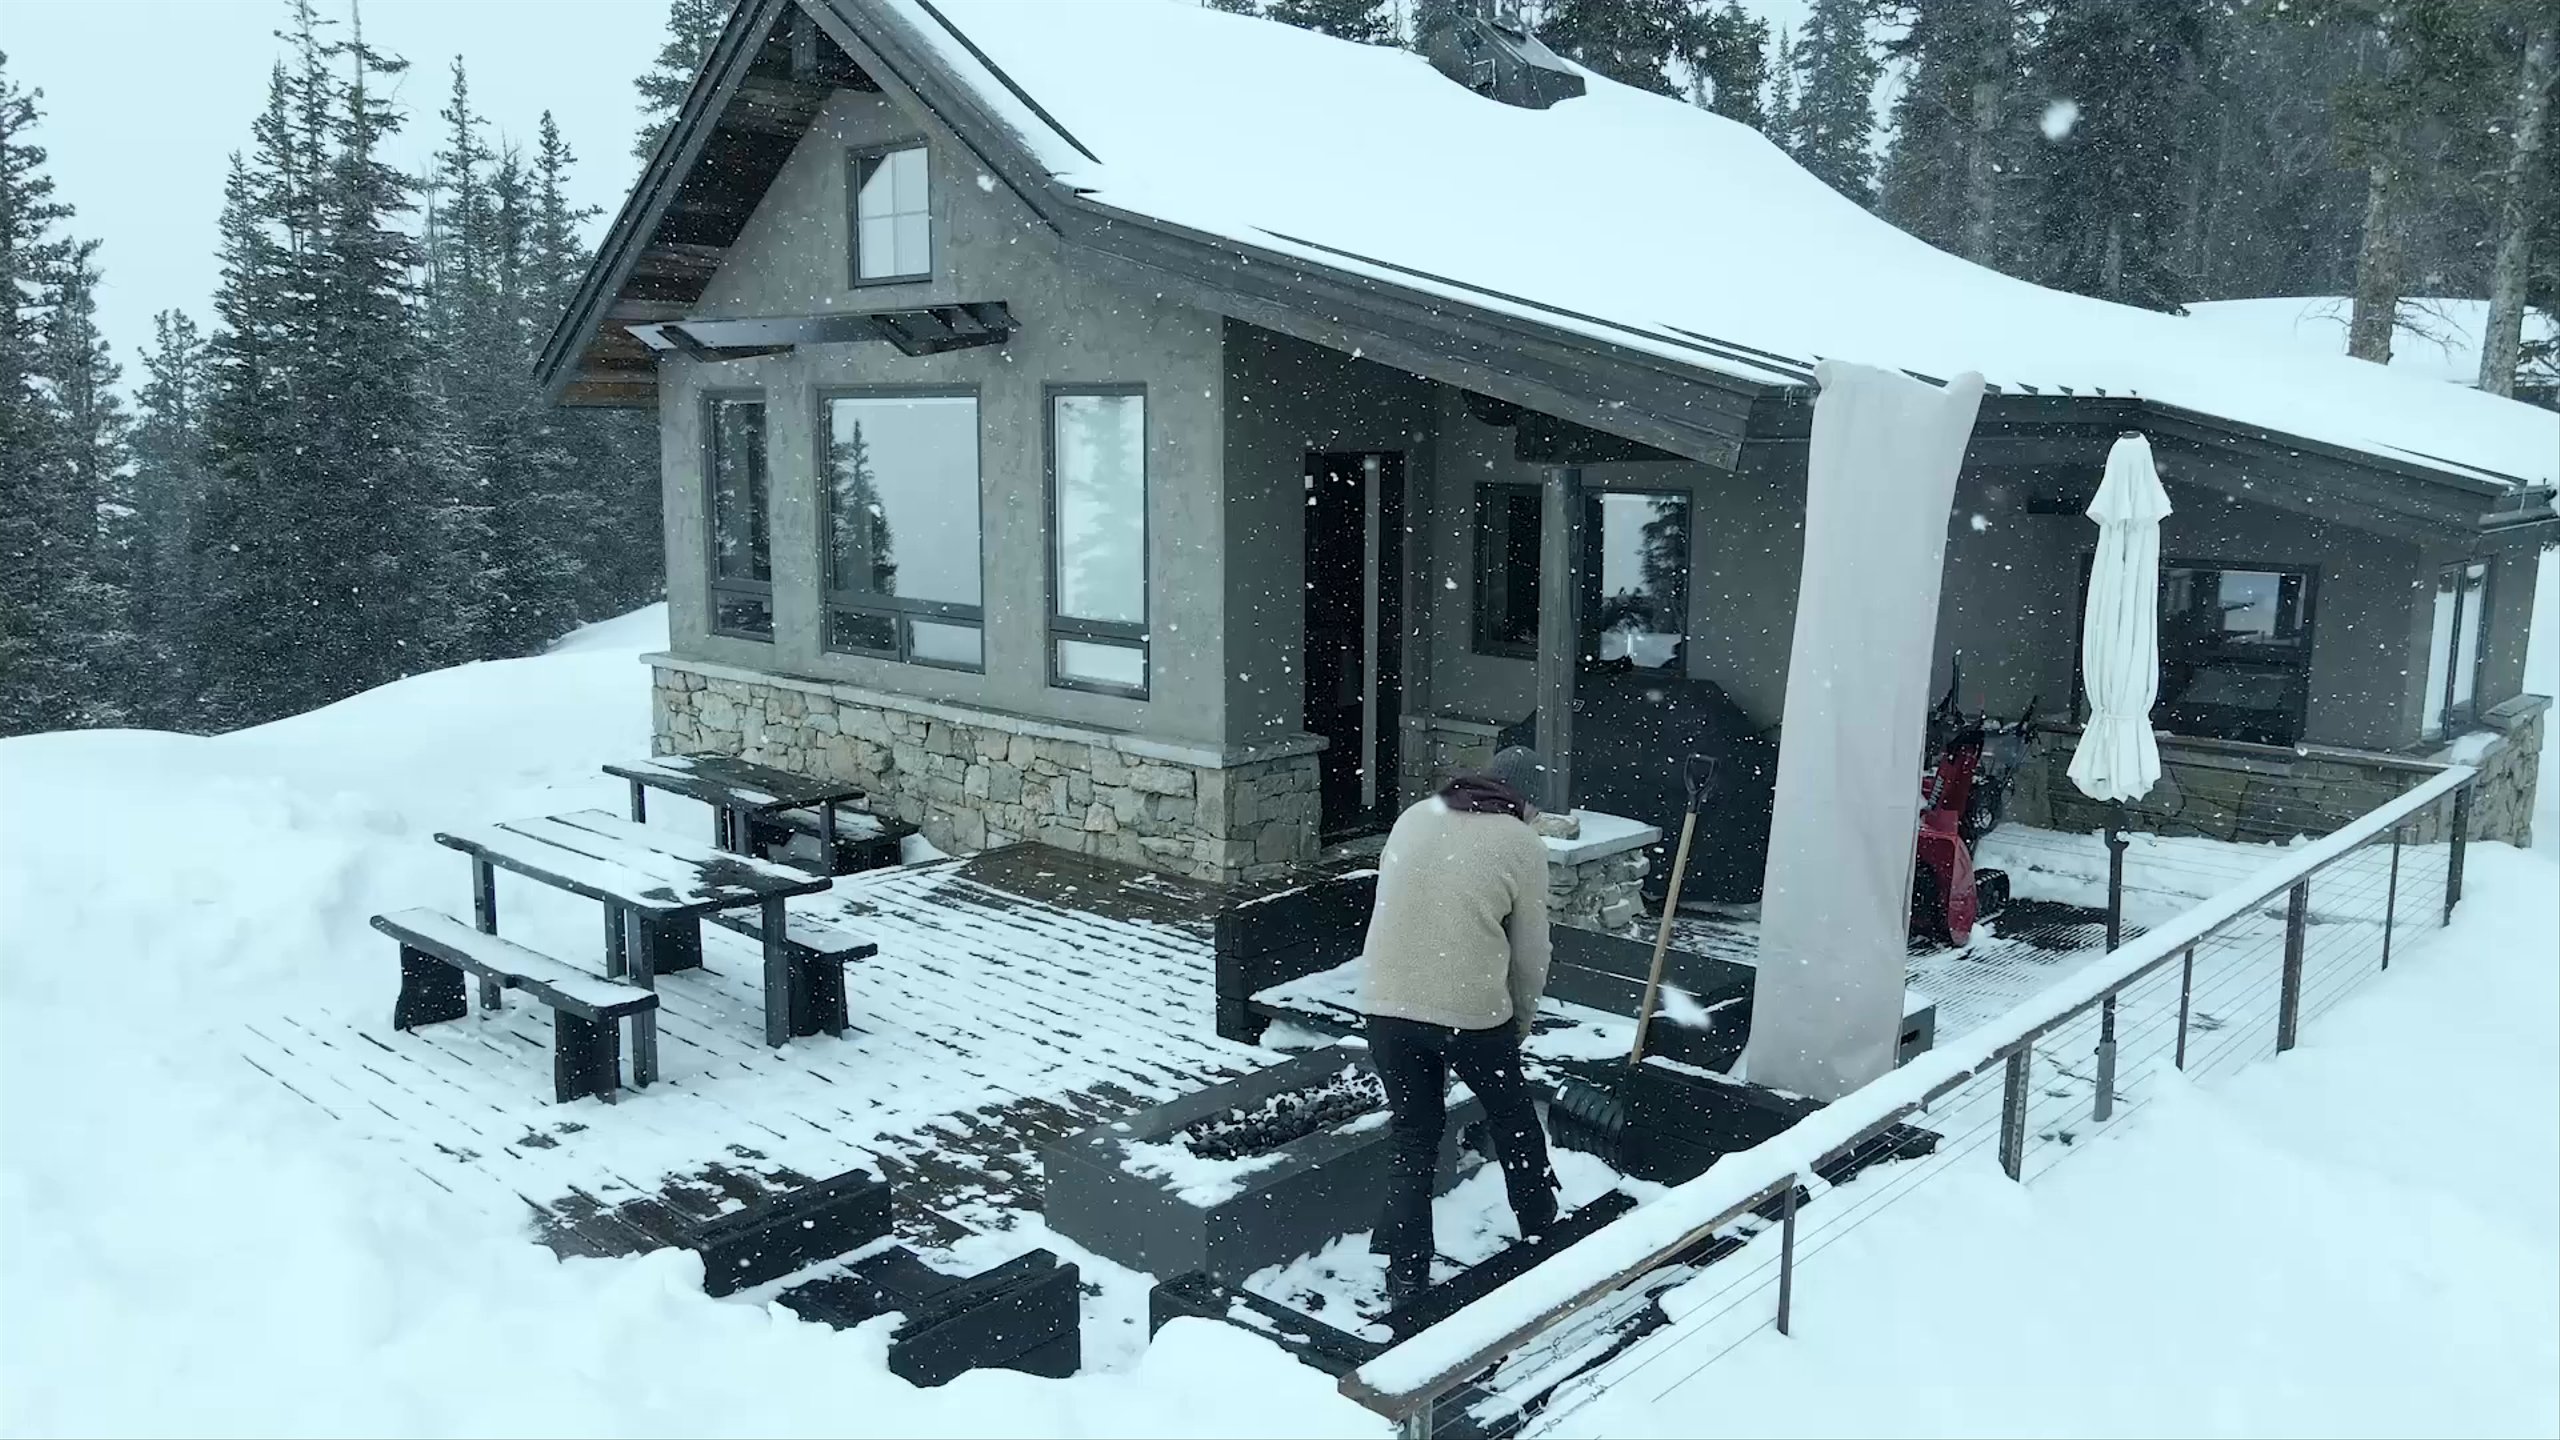 Video drone of man outside cabin pulling back to reveal full snowy mountain